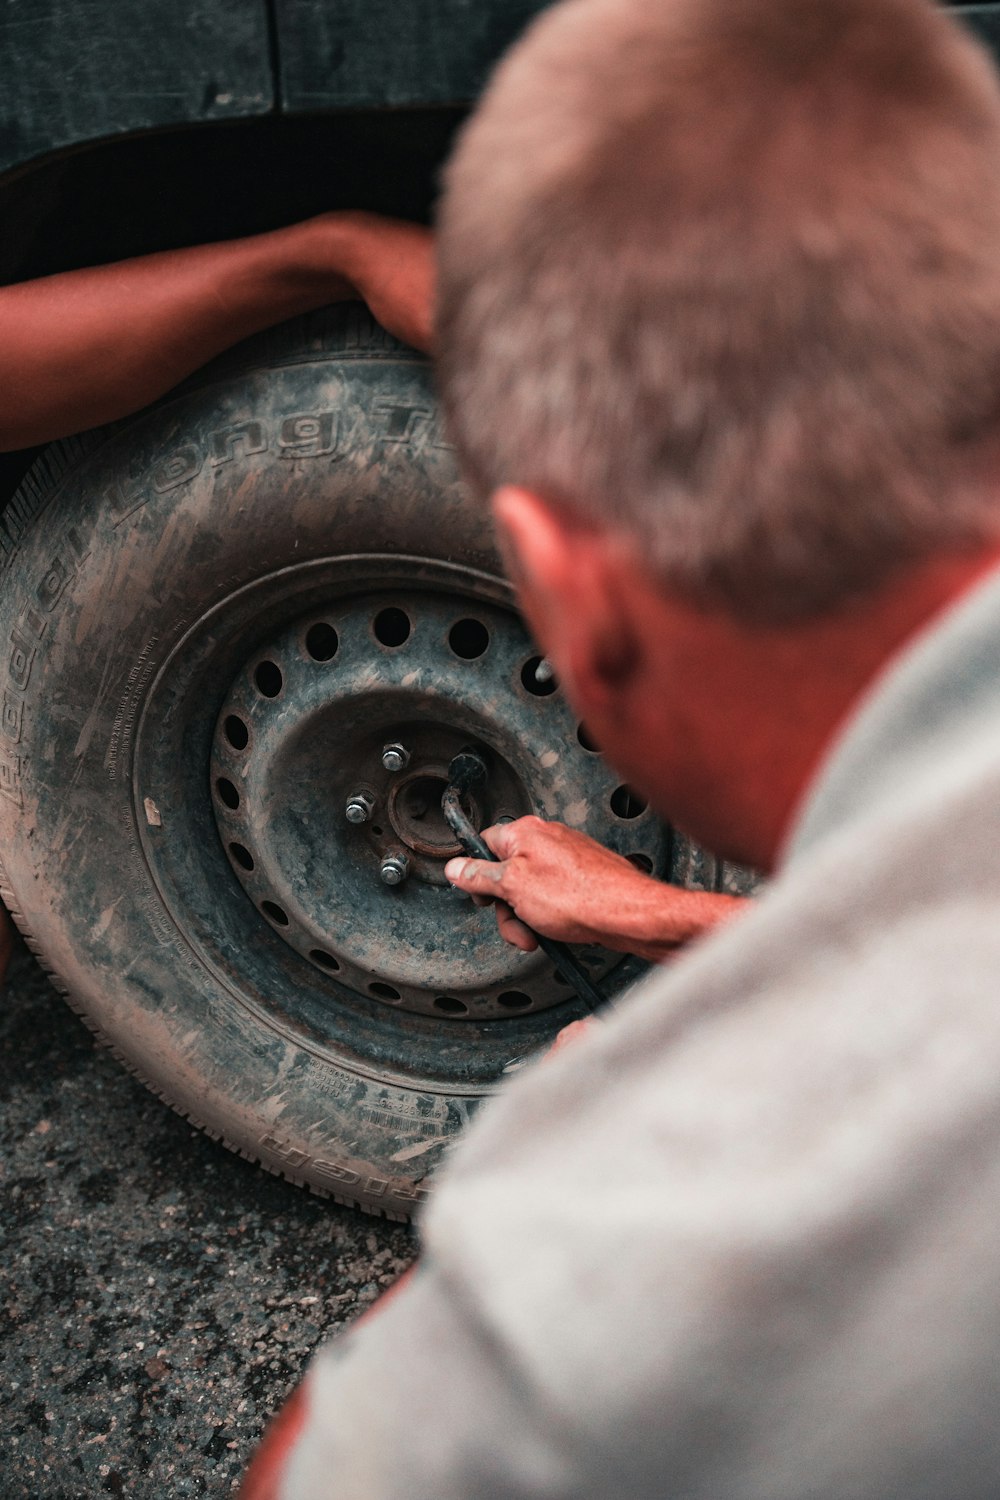 man fixing tire of vehicle